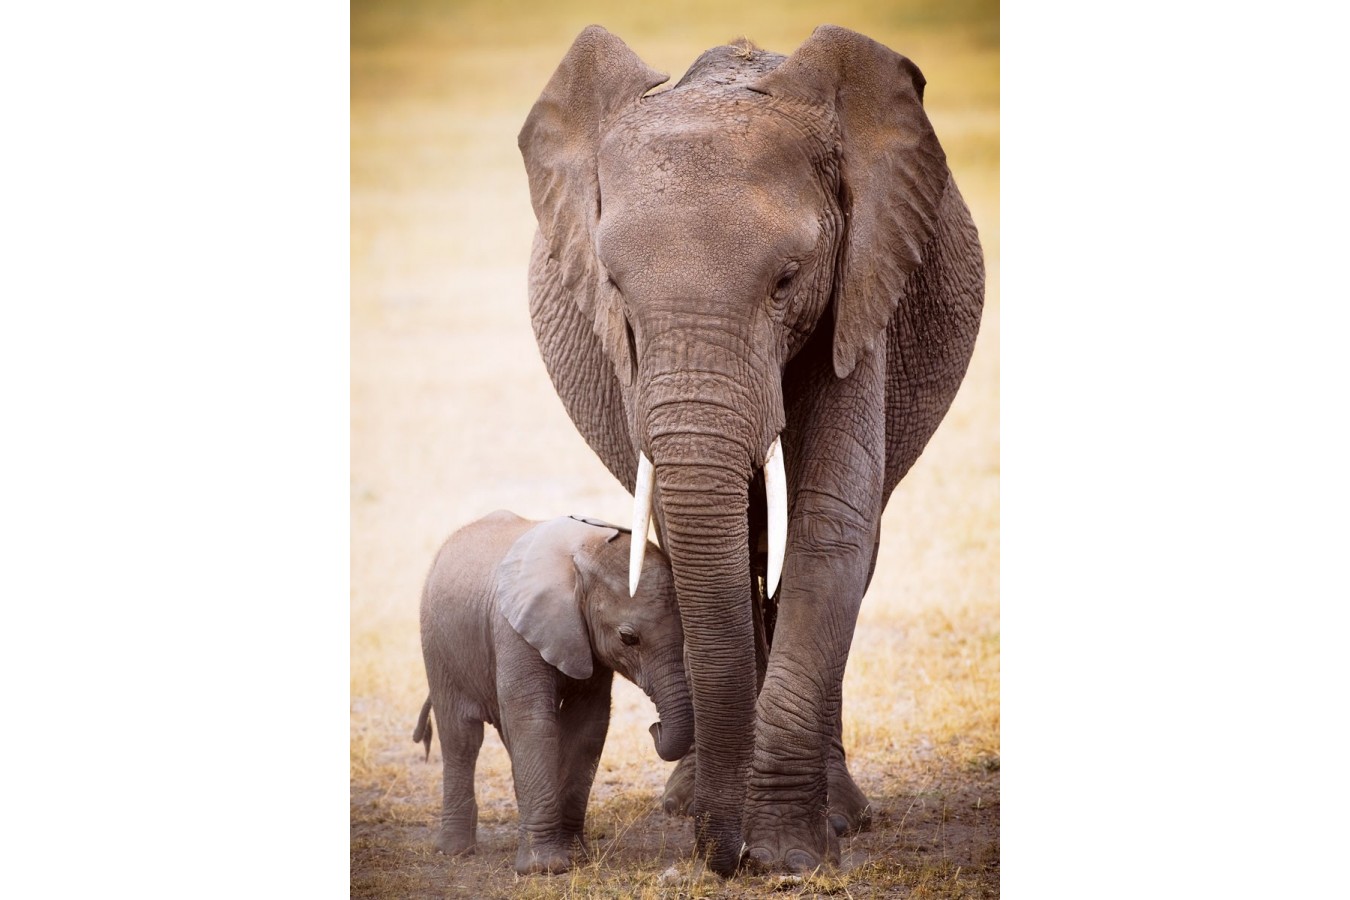 Puzzle Eurographics - The Elephant and baby elephant, 1000 piese (6000-0270)